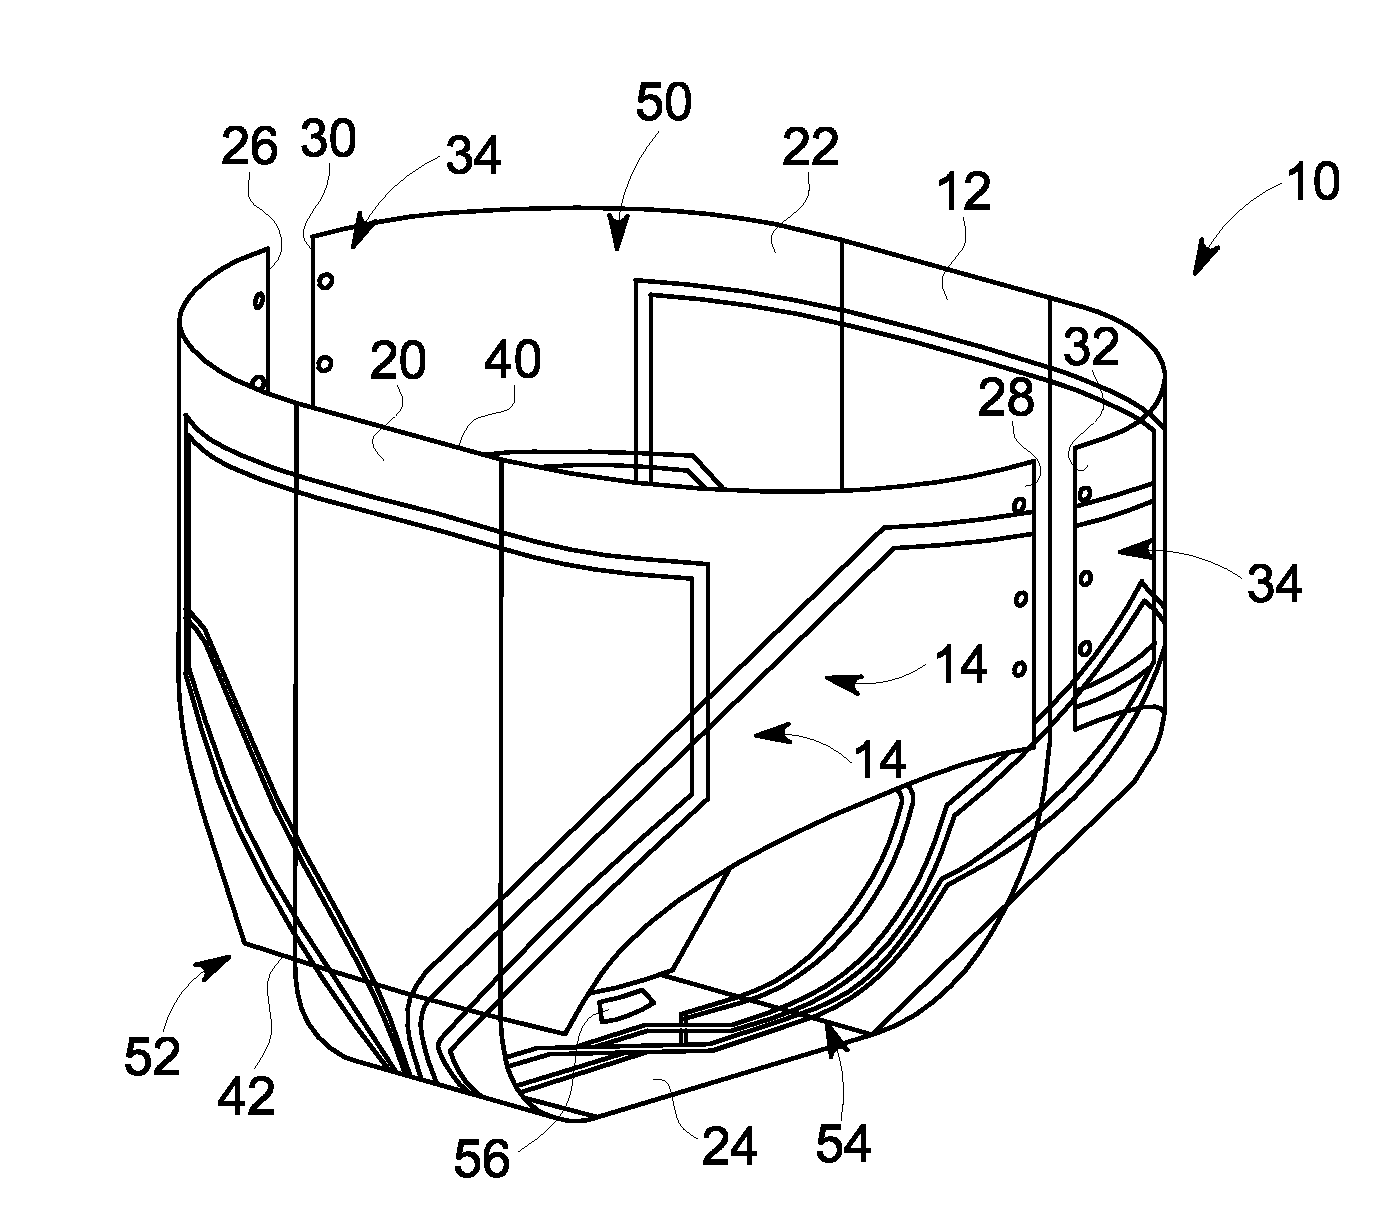 Method and apparatus for imaging a subject using local surface coils